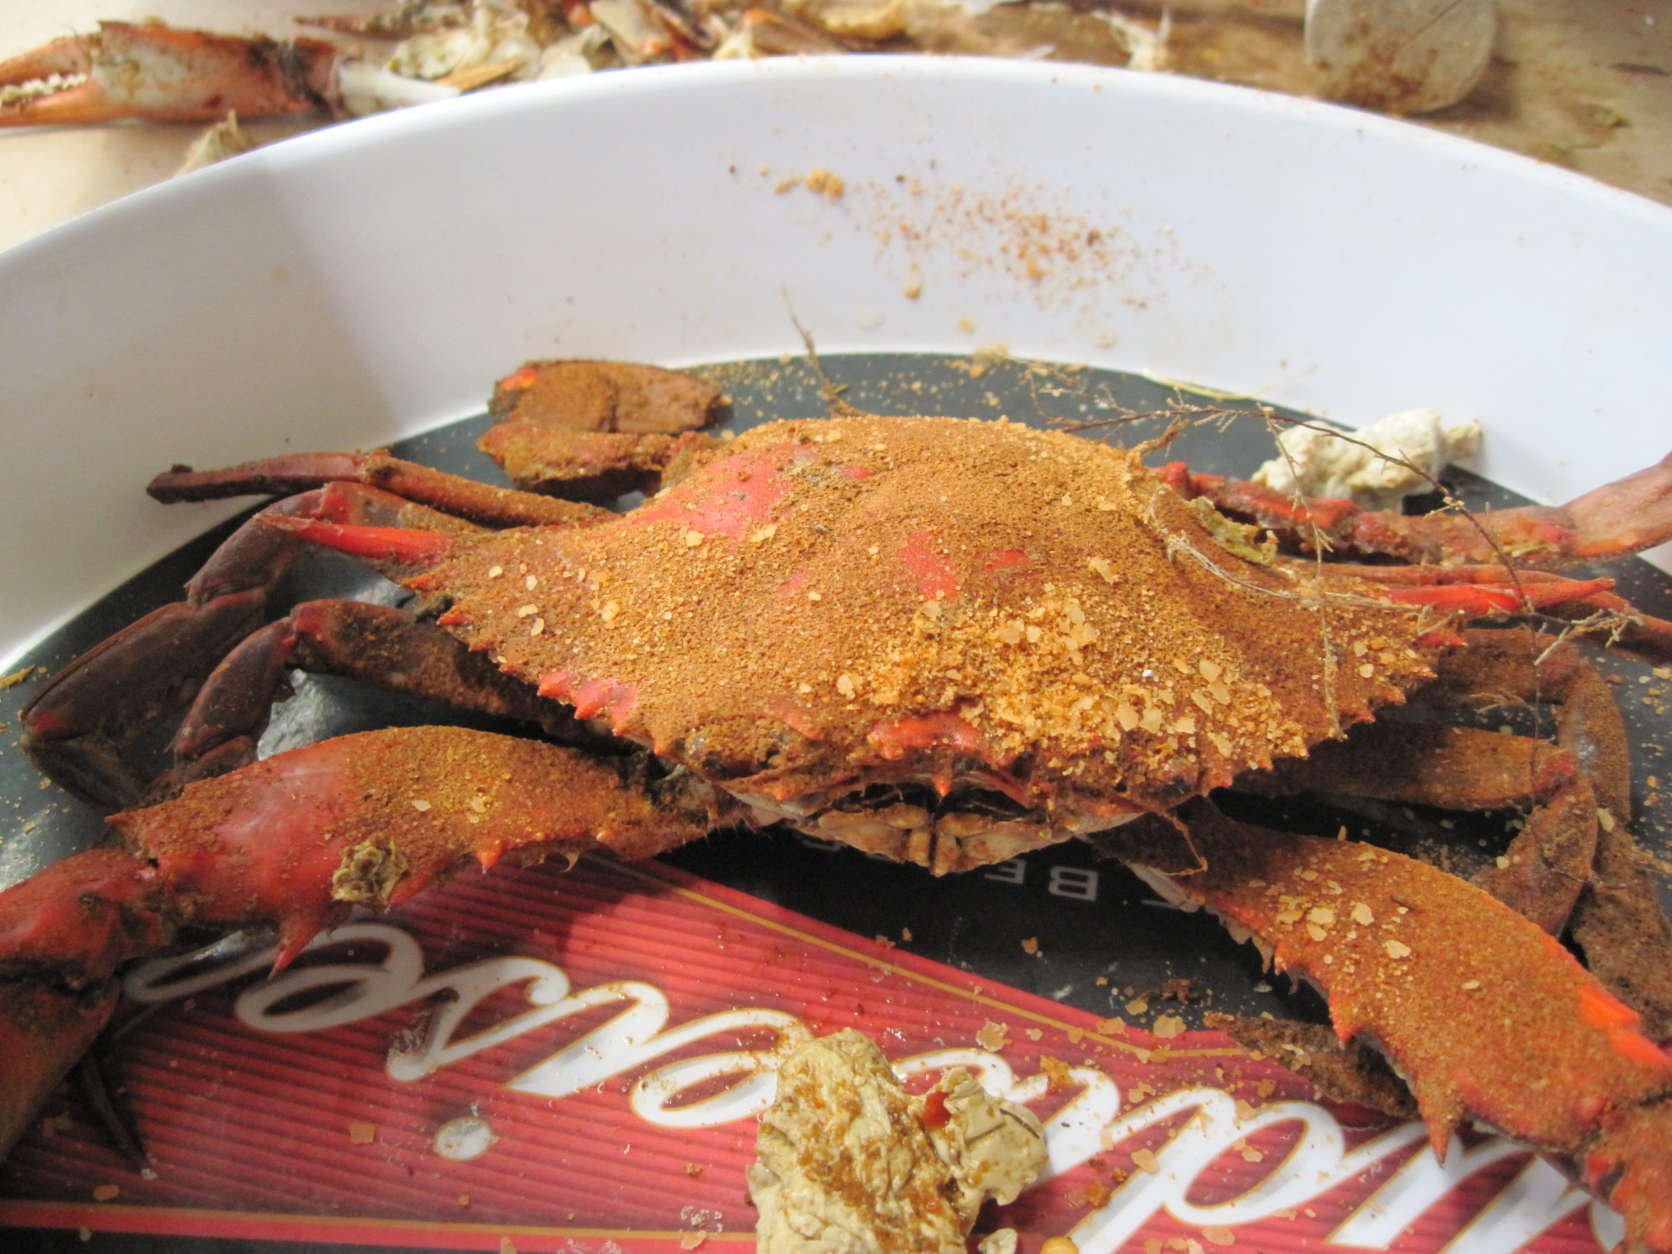 Photo shows a single steamed crab on a tray.